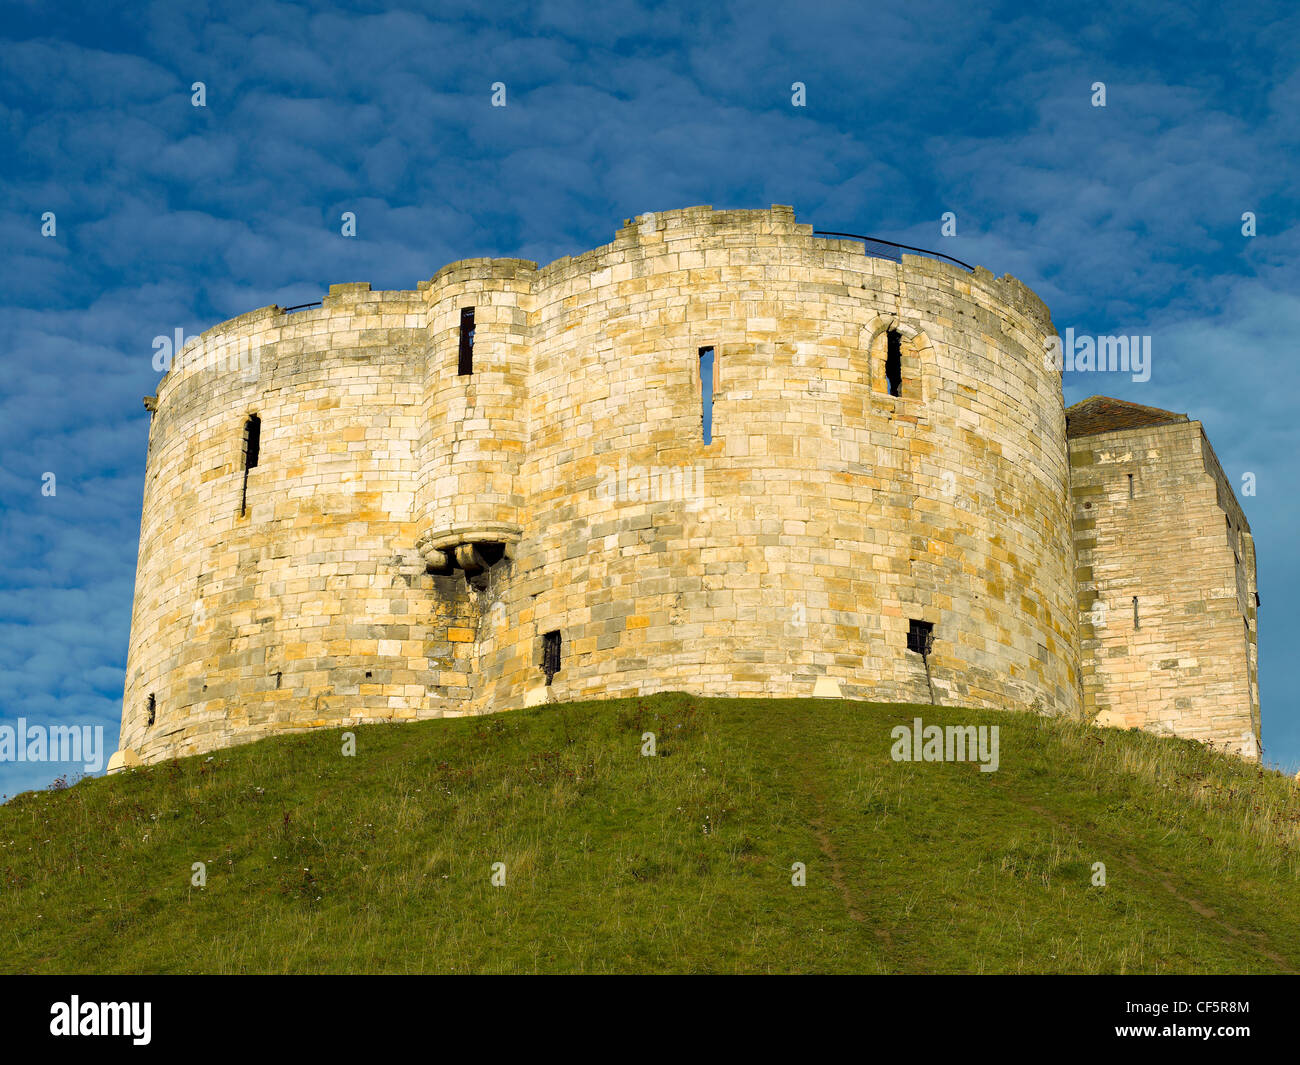 Clifford's Tower, built in the 13th century replacing an original timber keep burnt down during a siege by citizens of the Jewis Stock Photo